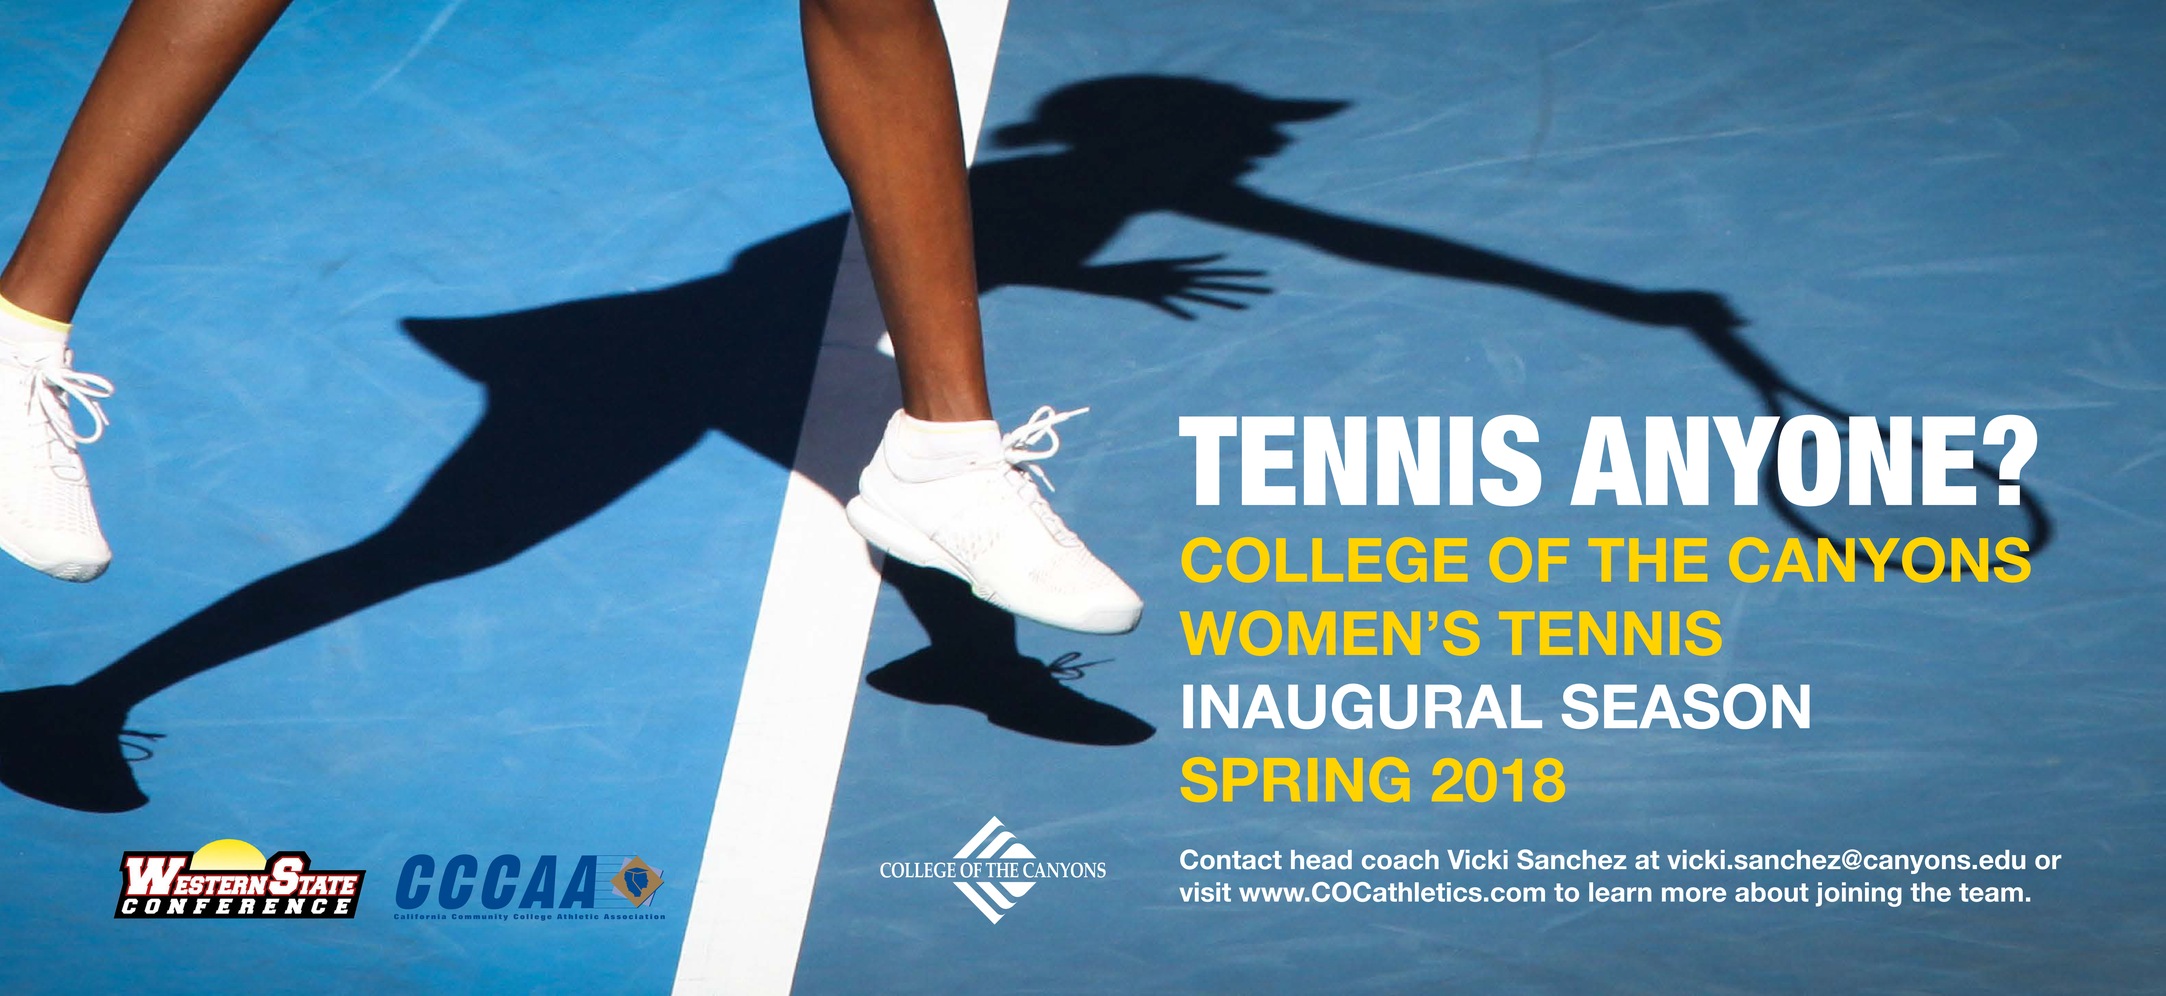 College of the Canyons to Launch Women's Tennis Program in Spring 2018